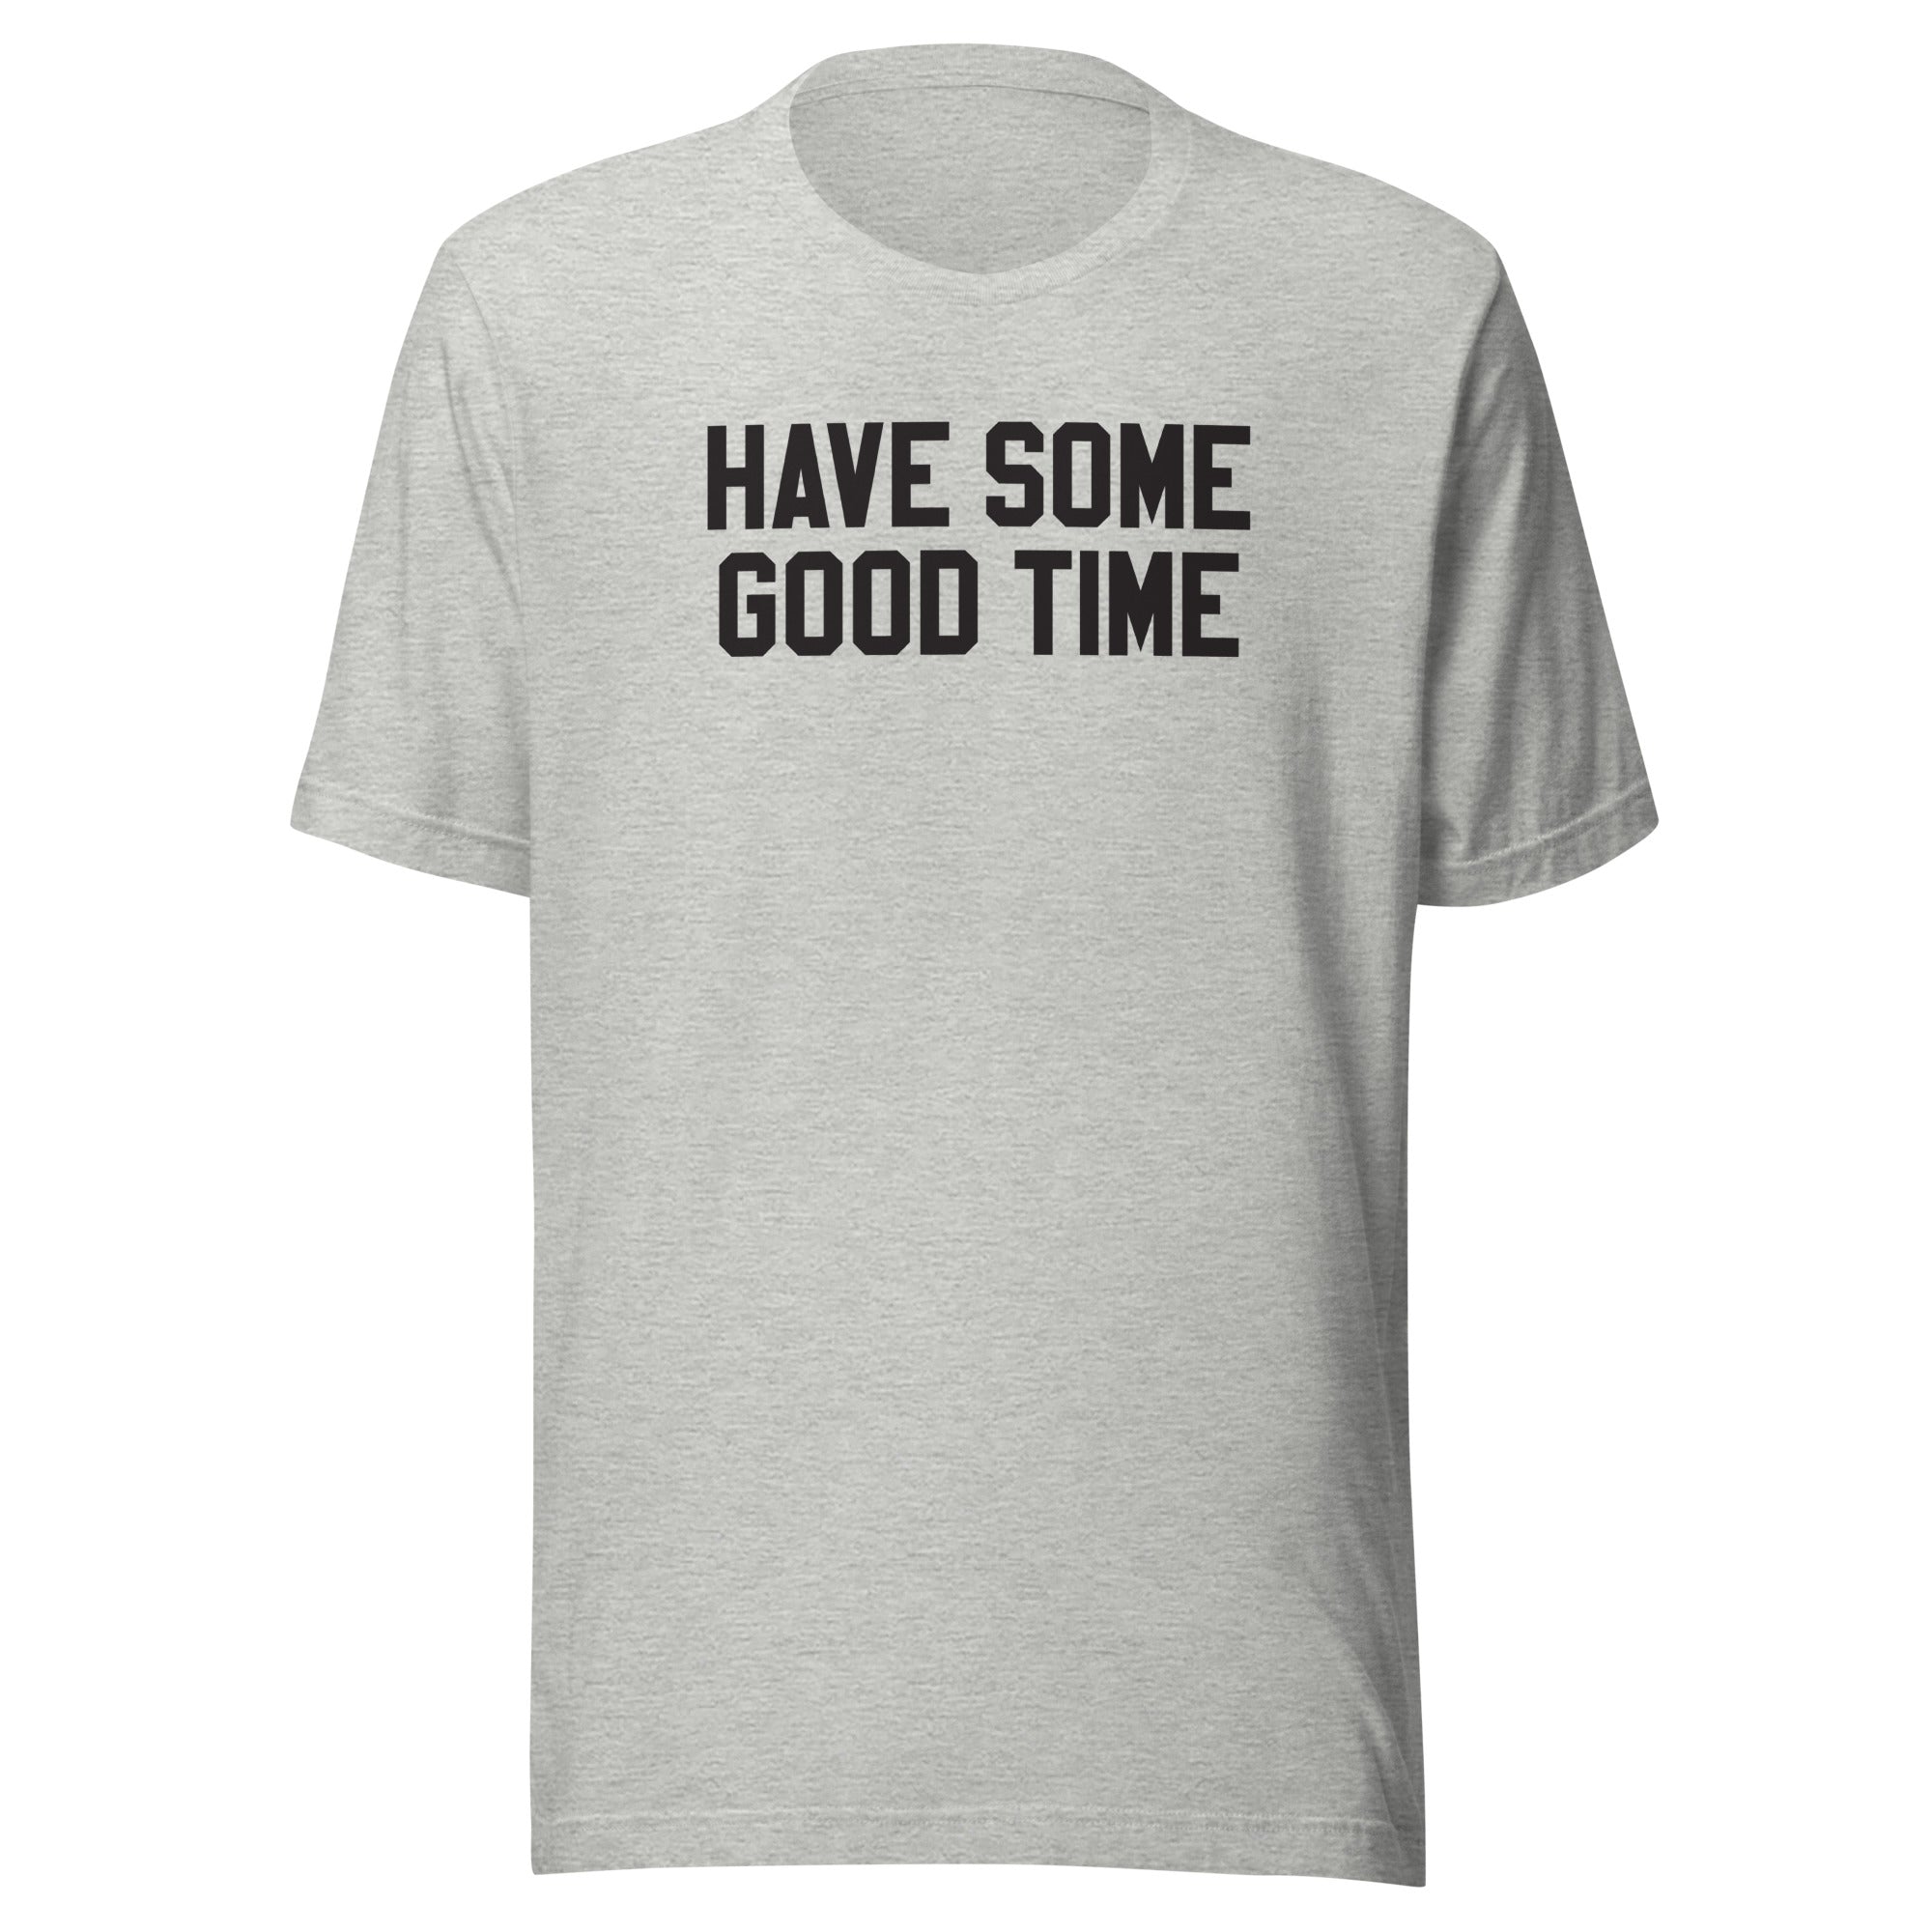 Conan O'Brien Needs A Friend: Have Some Good Time T-shirt (Grey)